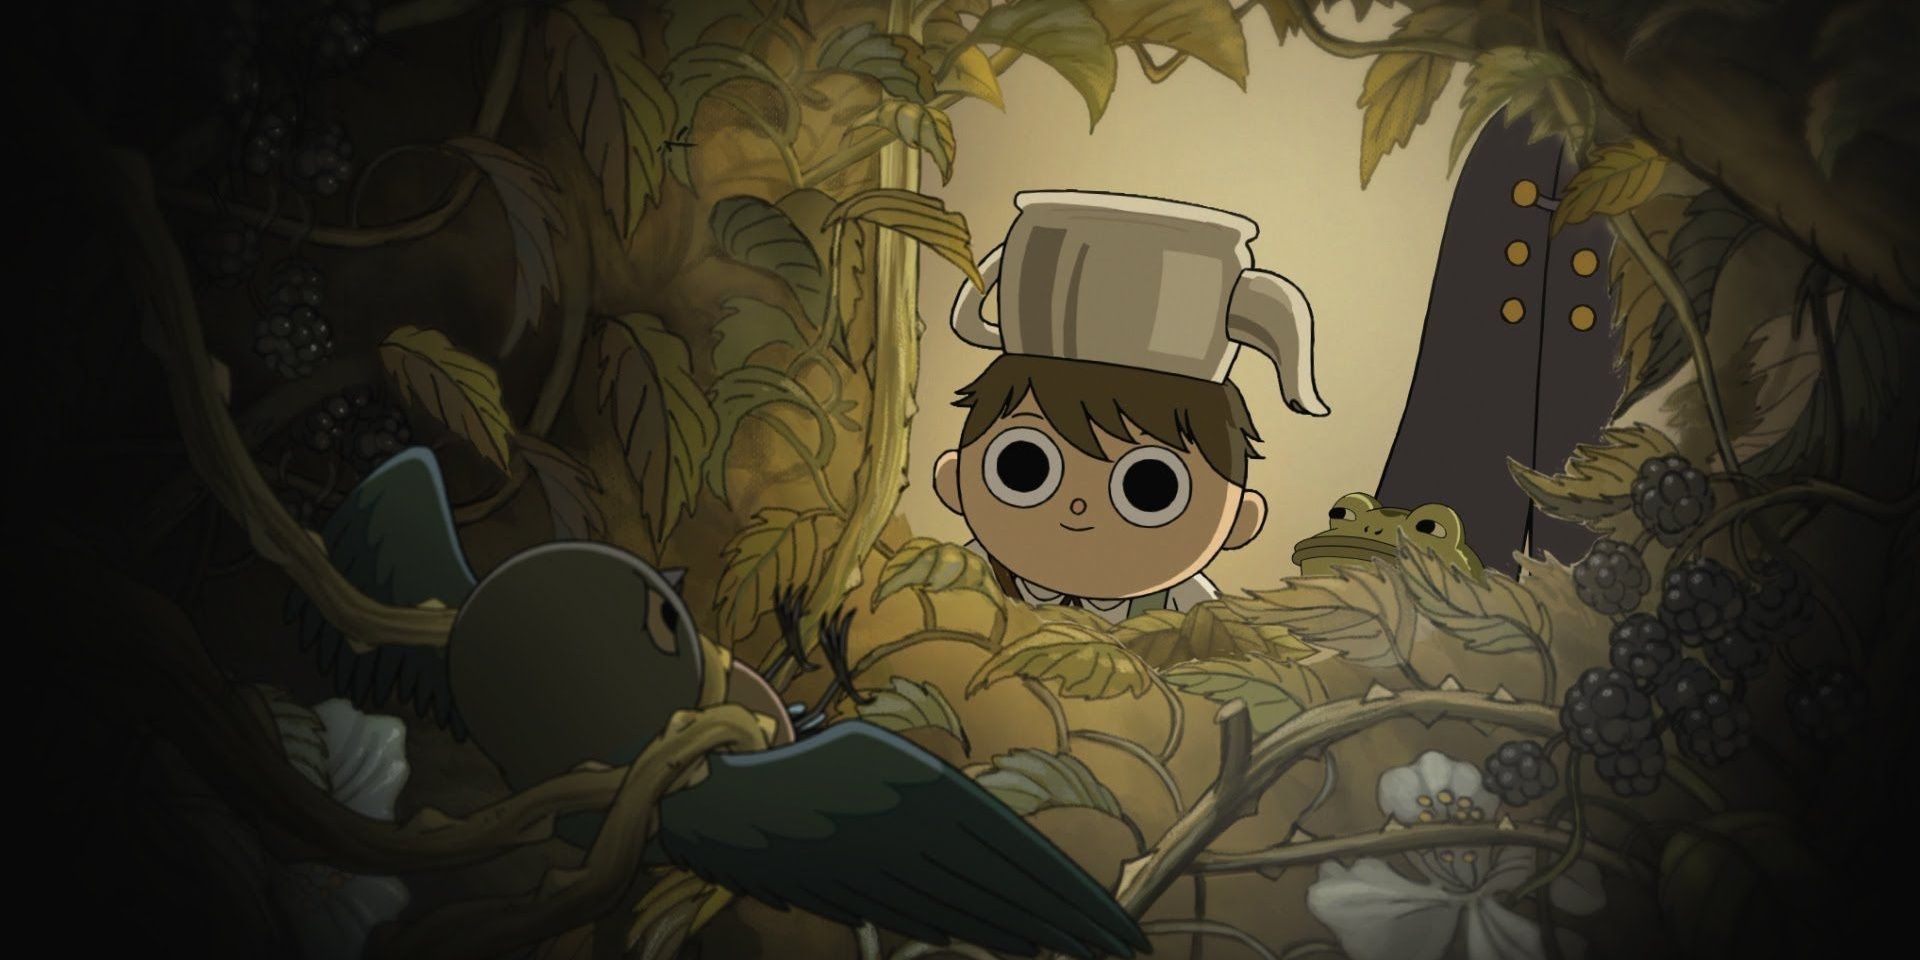 During Over the Garden Wall, Greg finds Beatrice the bird trapped in a bramble bush